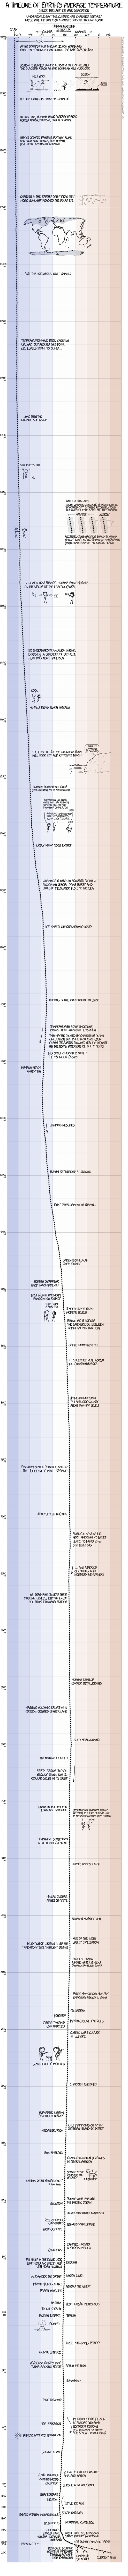 http://imgs.xkcd.com/comics/earth_temperature_timeline.png